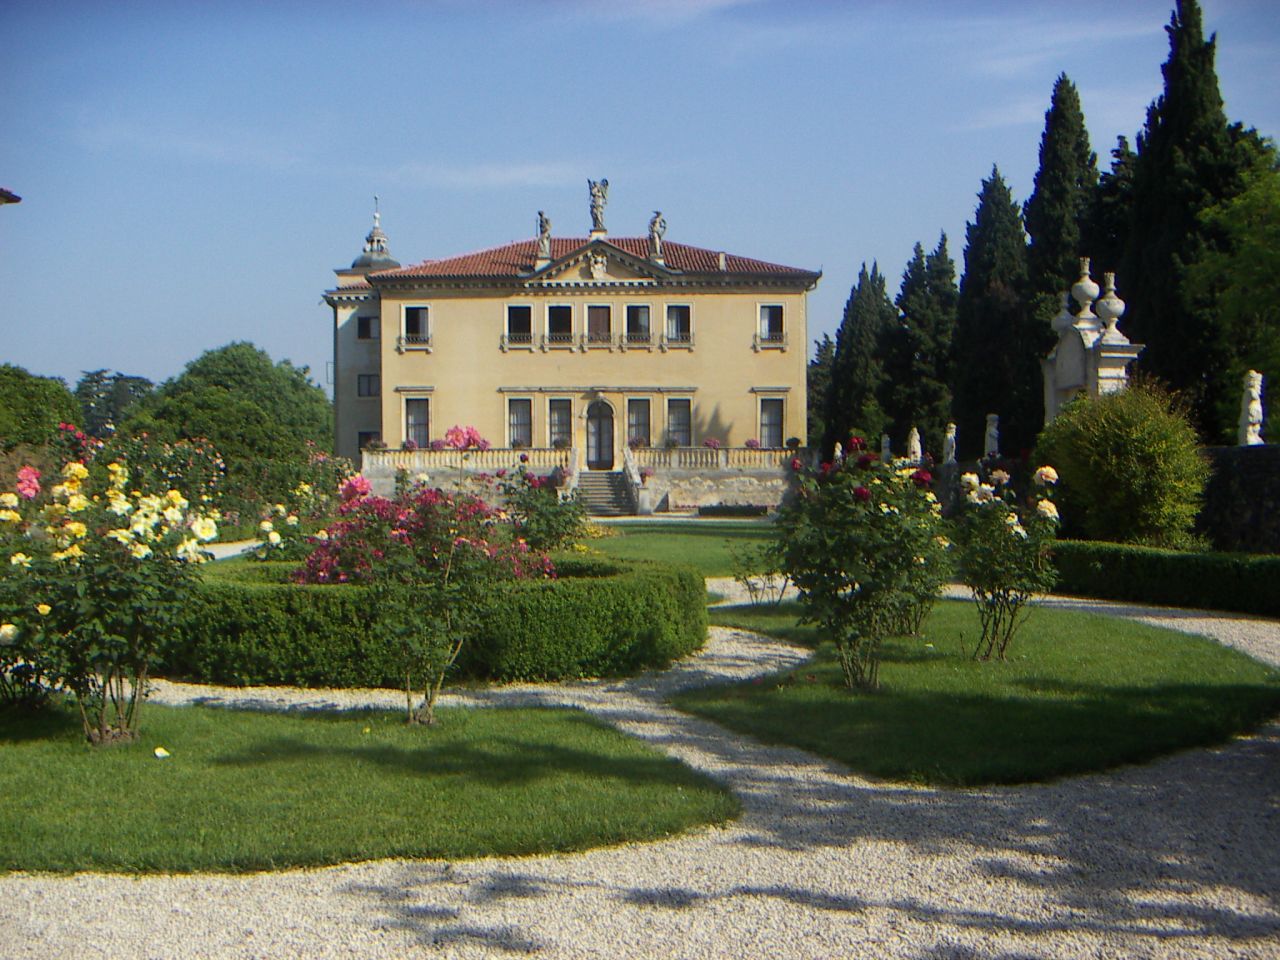 Countessa Carolina Valmarana owns the 17th century Villa Valmarana. She admits the upkeep would be impossible to afford if she didn't open her home up to tourists. 